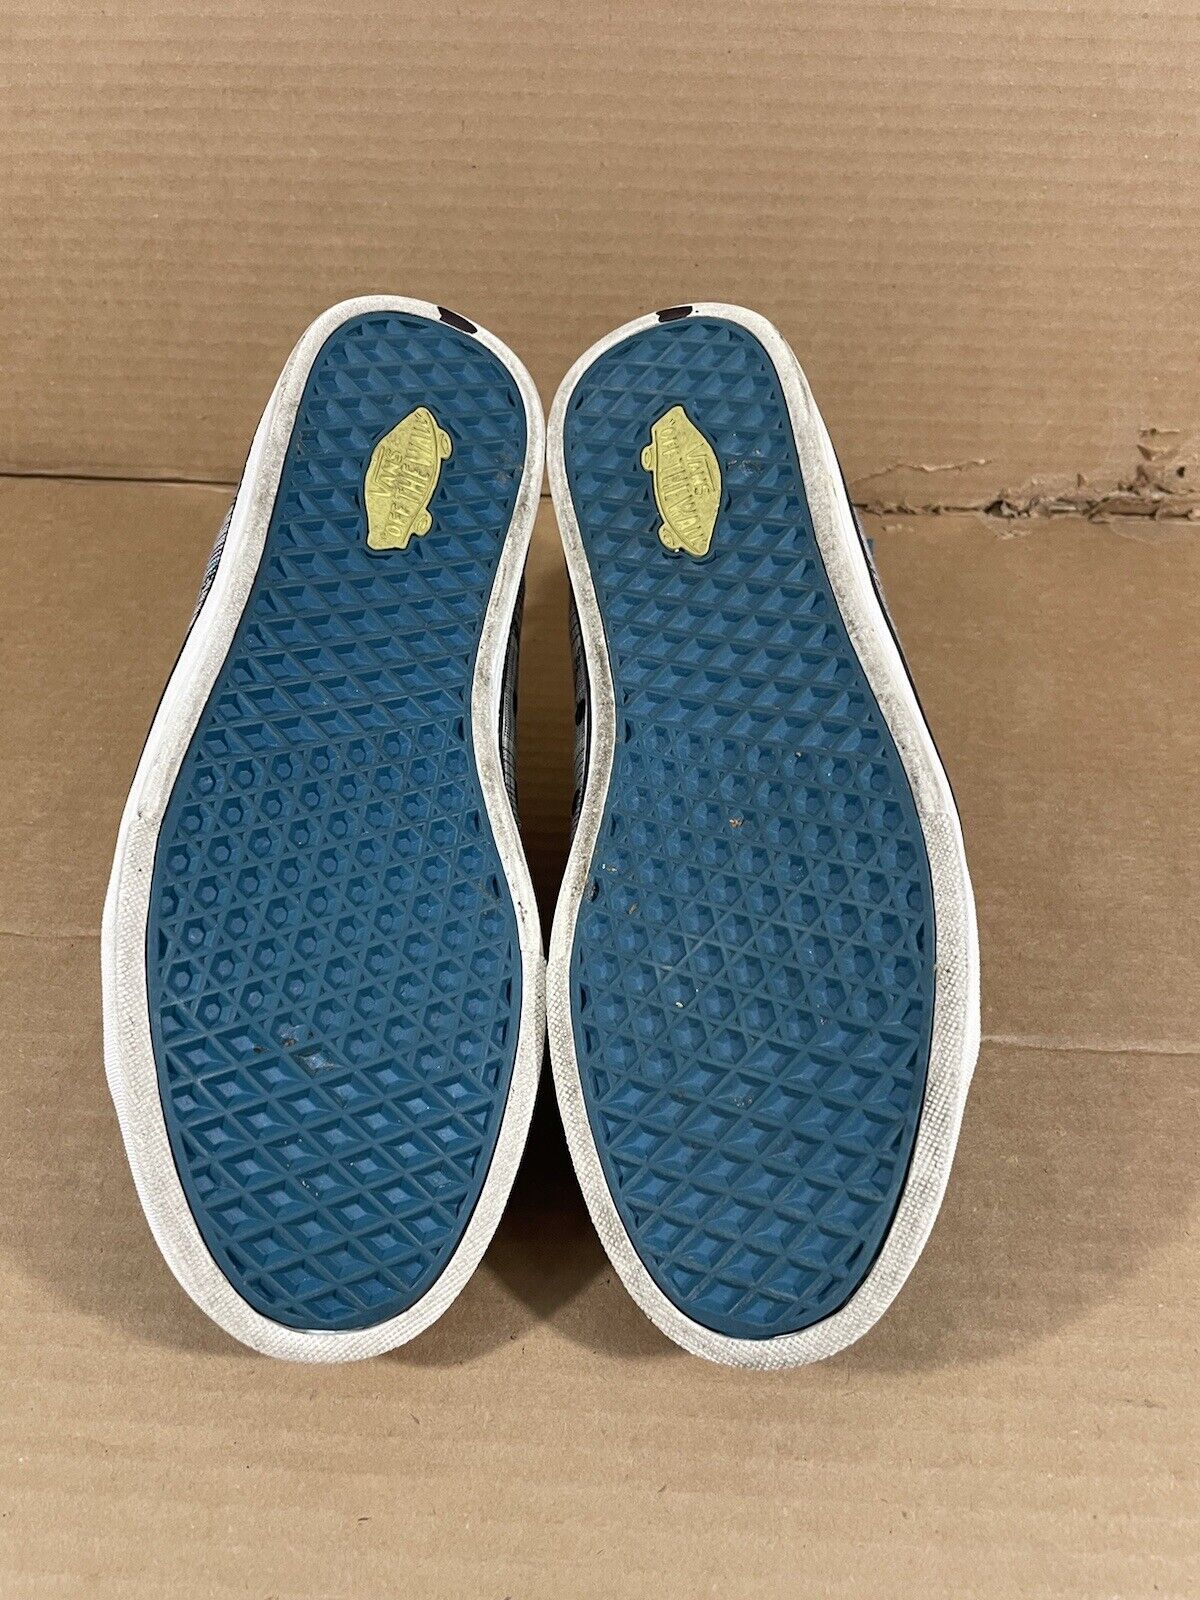 Vans Off The Wall Dollin Skateboard Shoes Blue Bl… - image 9